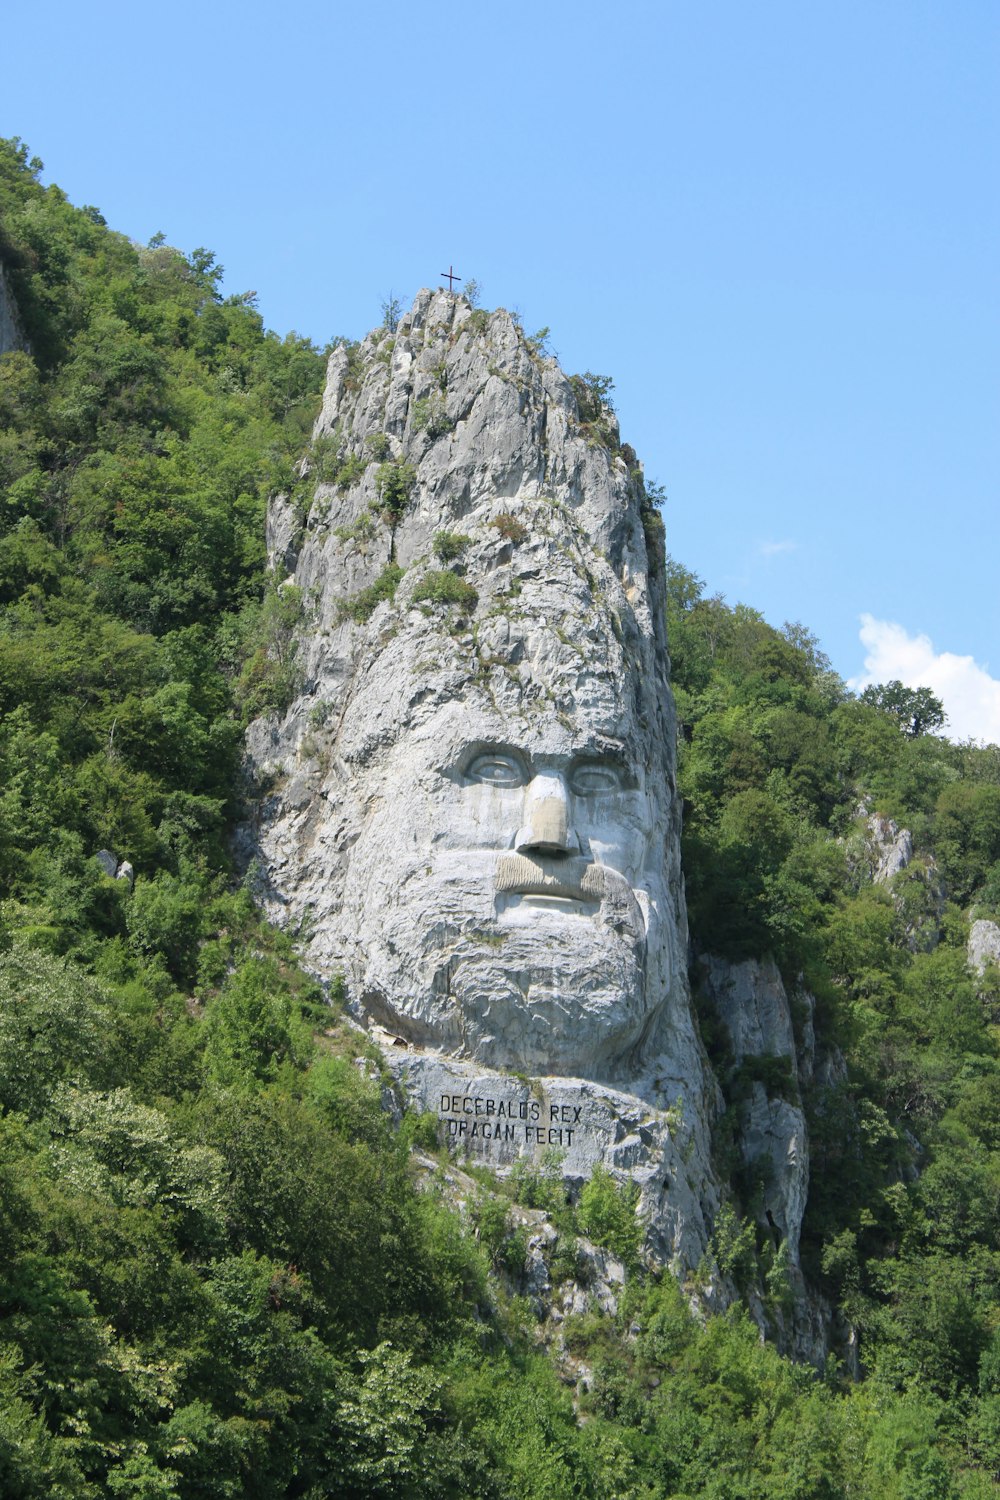 a large rock with a face carved into it with Rock sculpture of Decebalus in the background